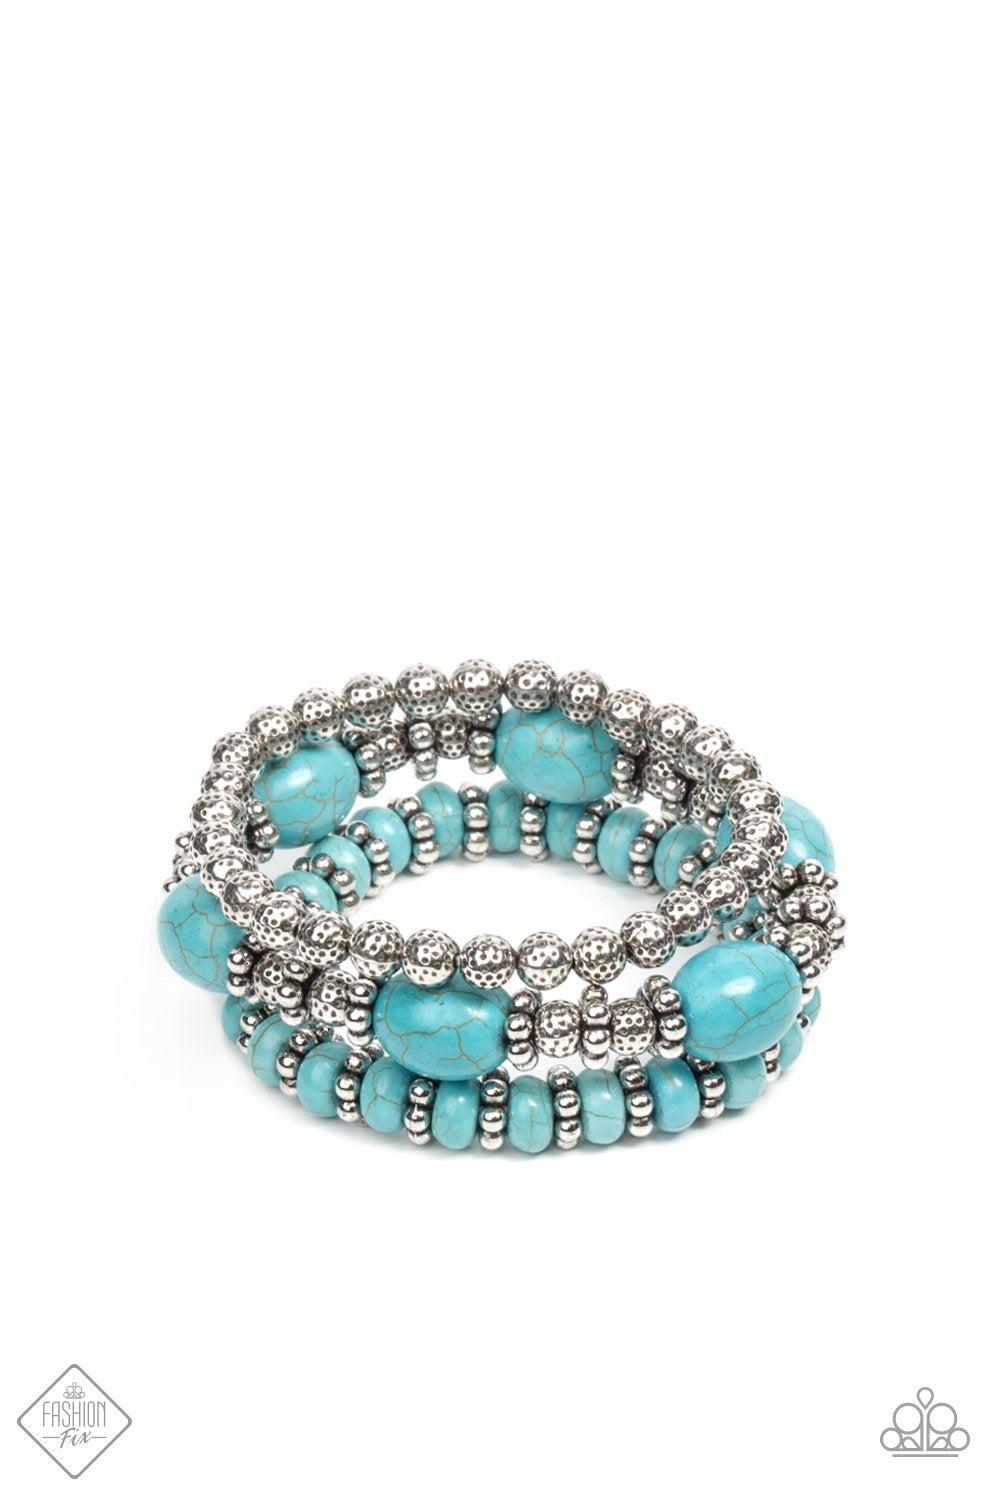 Take By SANDSTORM Turquoise Blue Stone Bracelet Set - Paparazzi Accessories- lightbox - CarasShop.com - $5 Jewelry by Cara Jewels